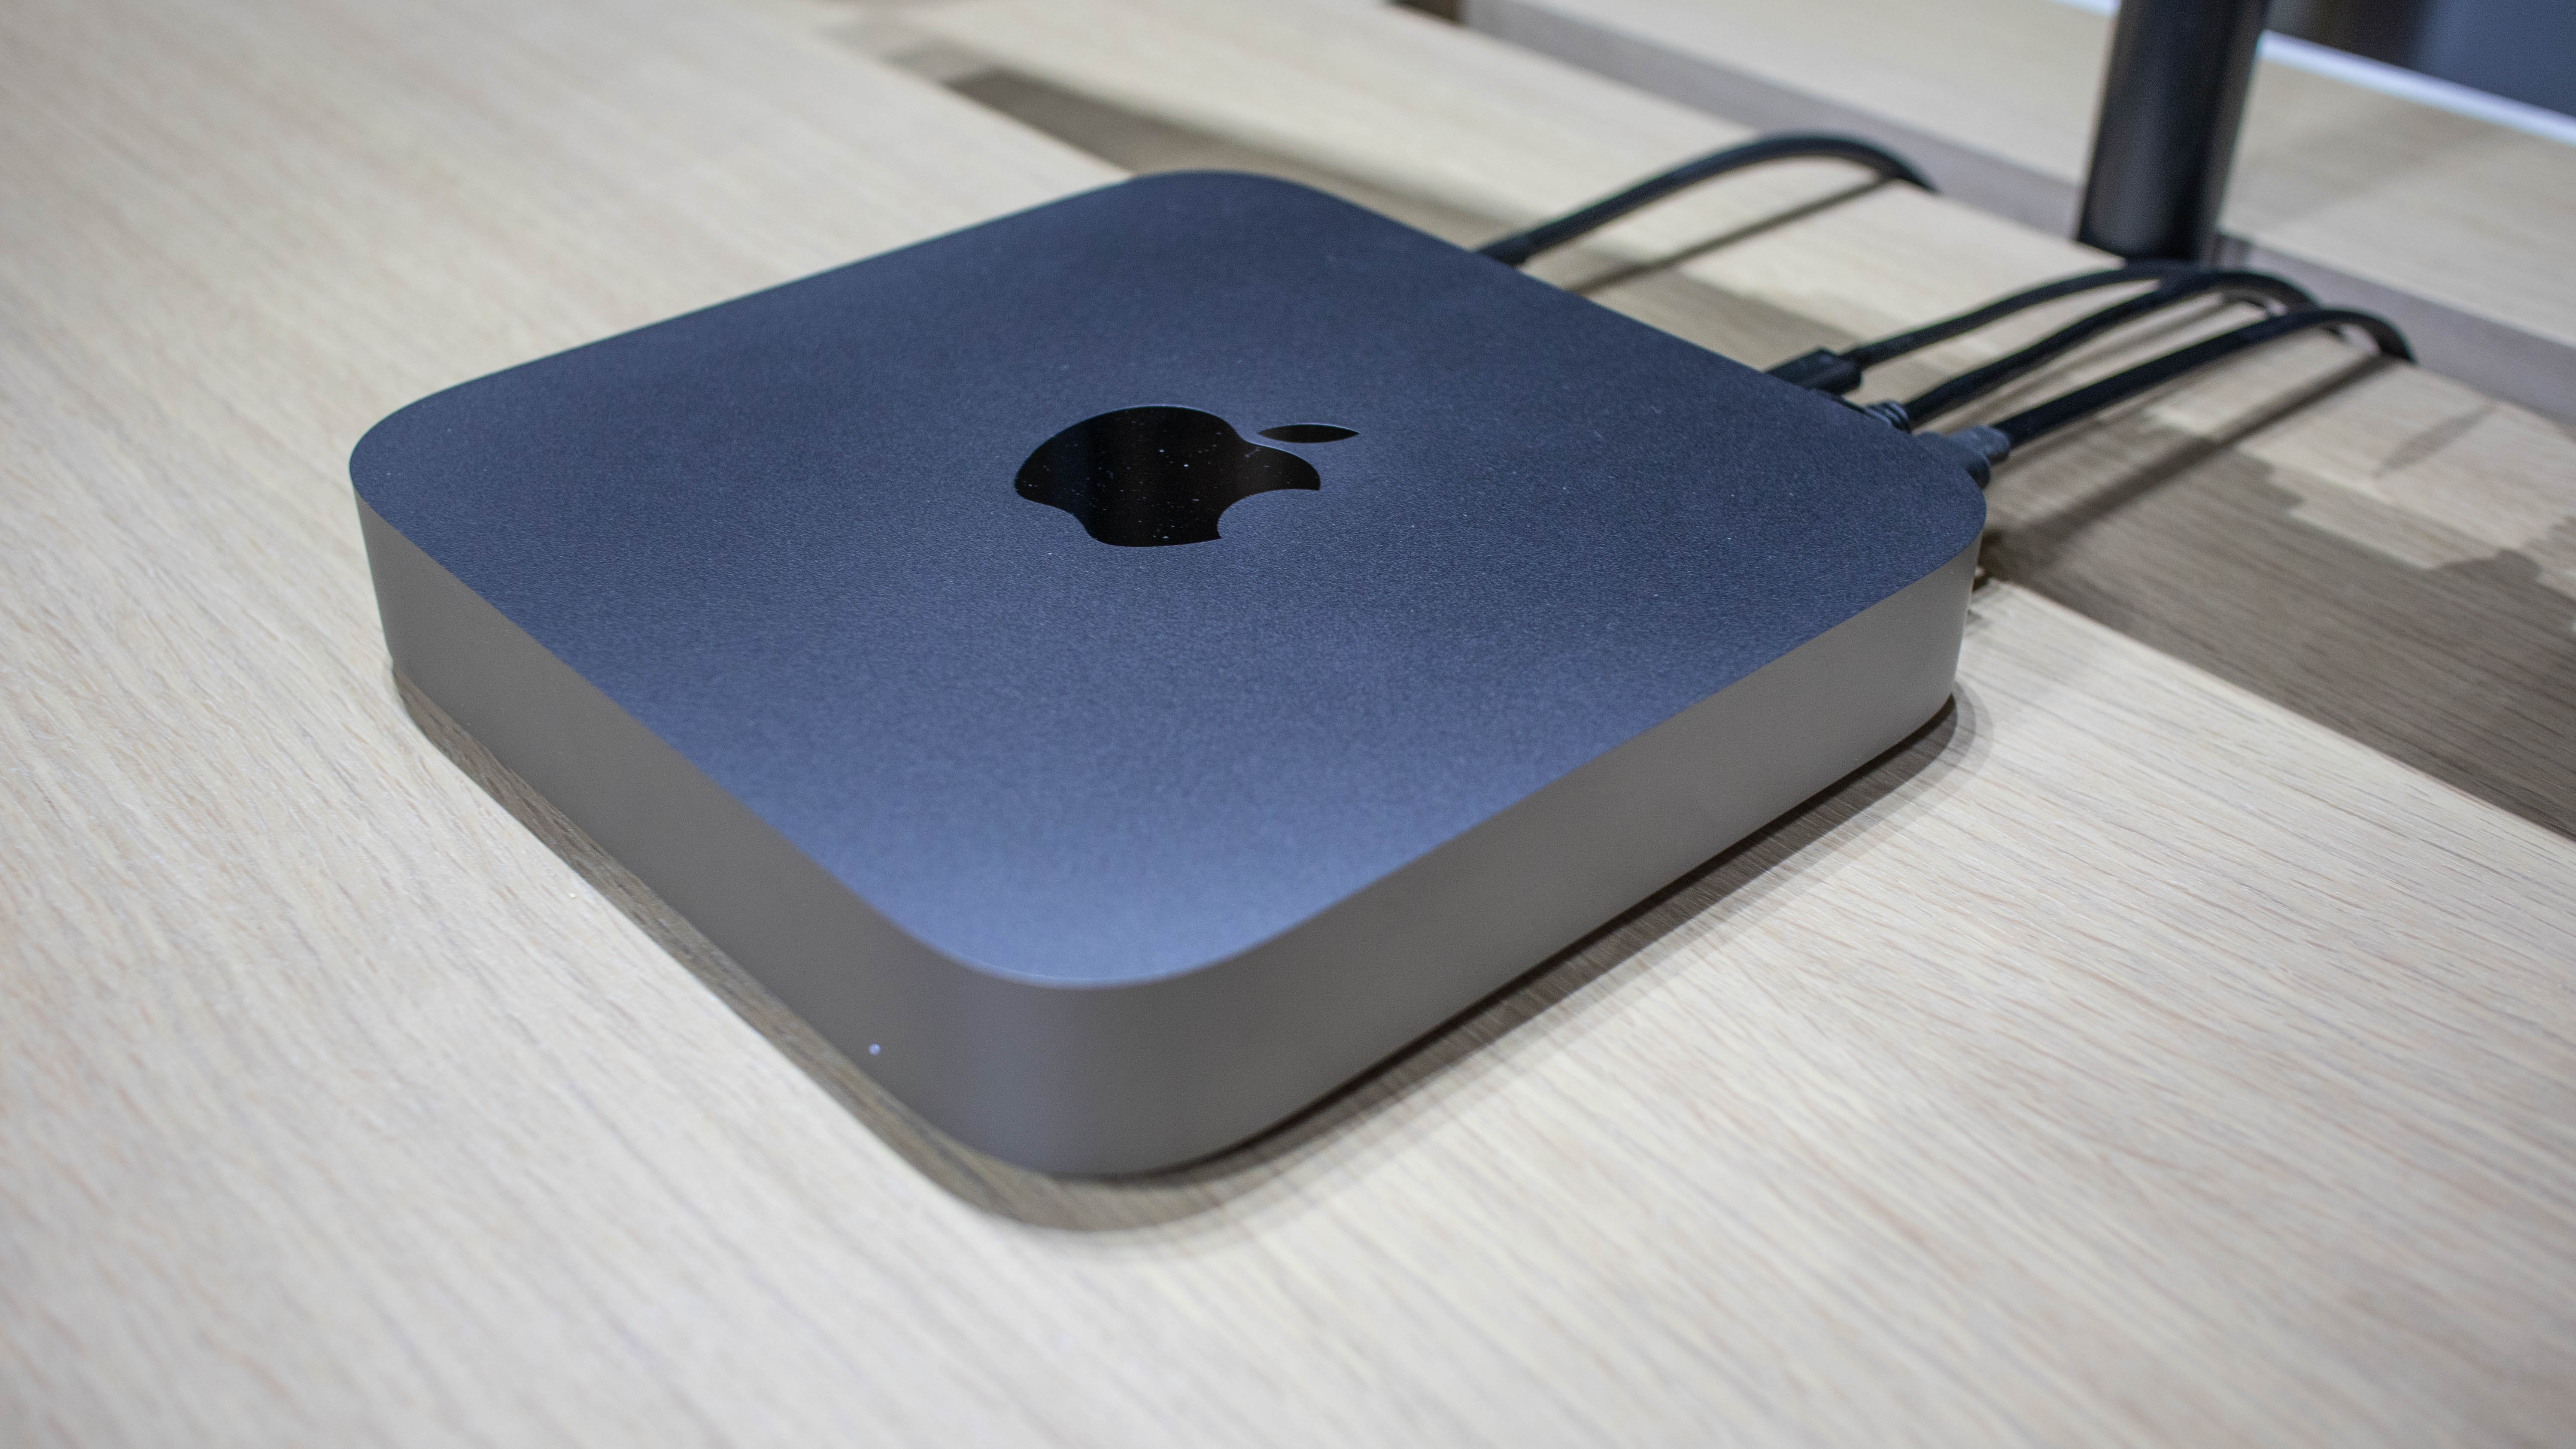 Mac mini 2020 release date, price and specs everything we know TechRadar